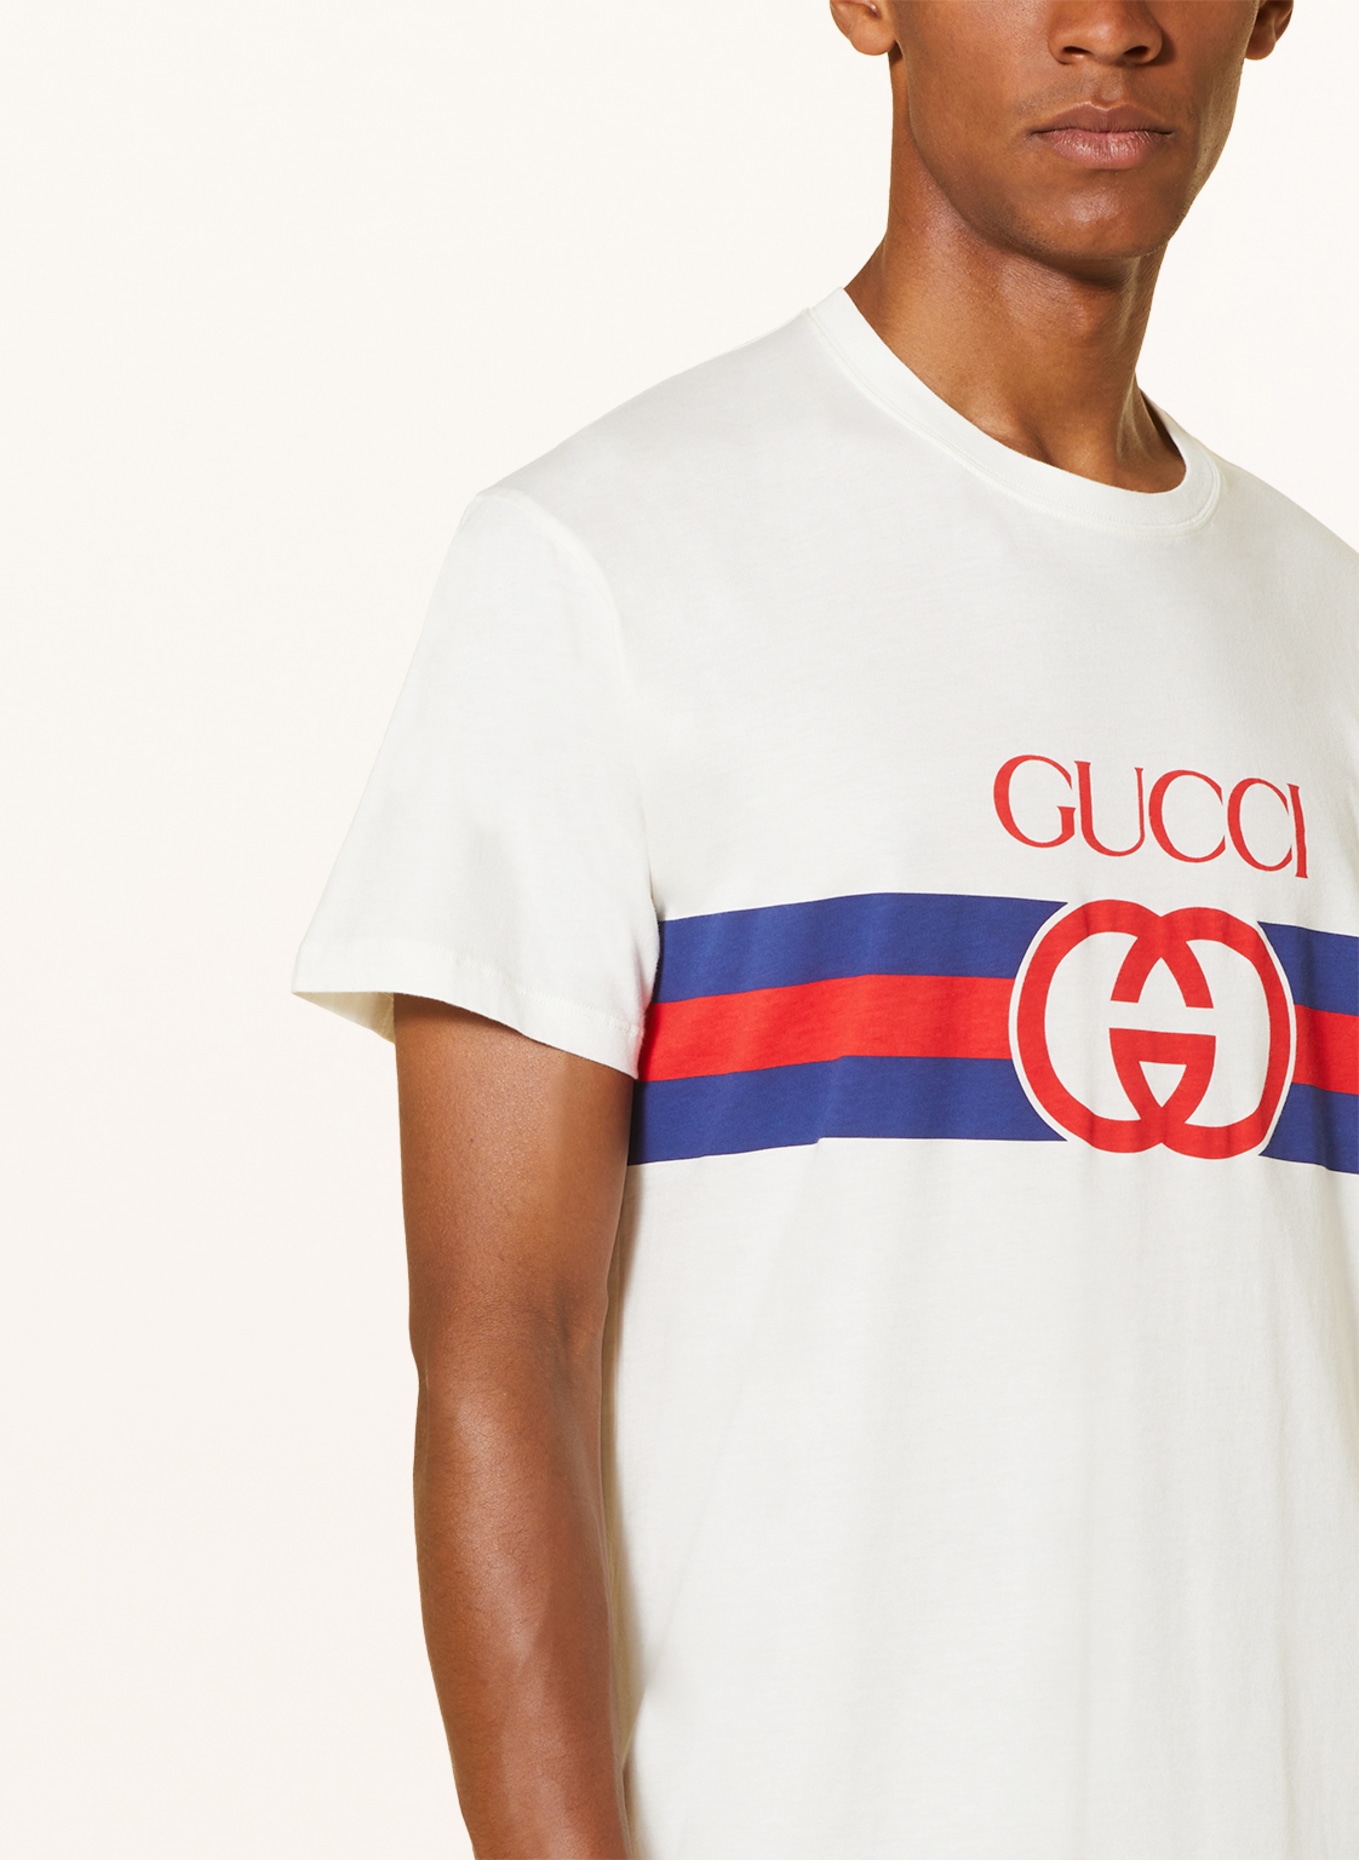 GUCCI T-shirt in white/ dark blue/ red